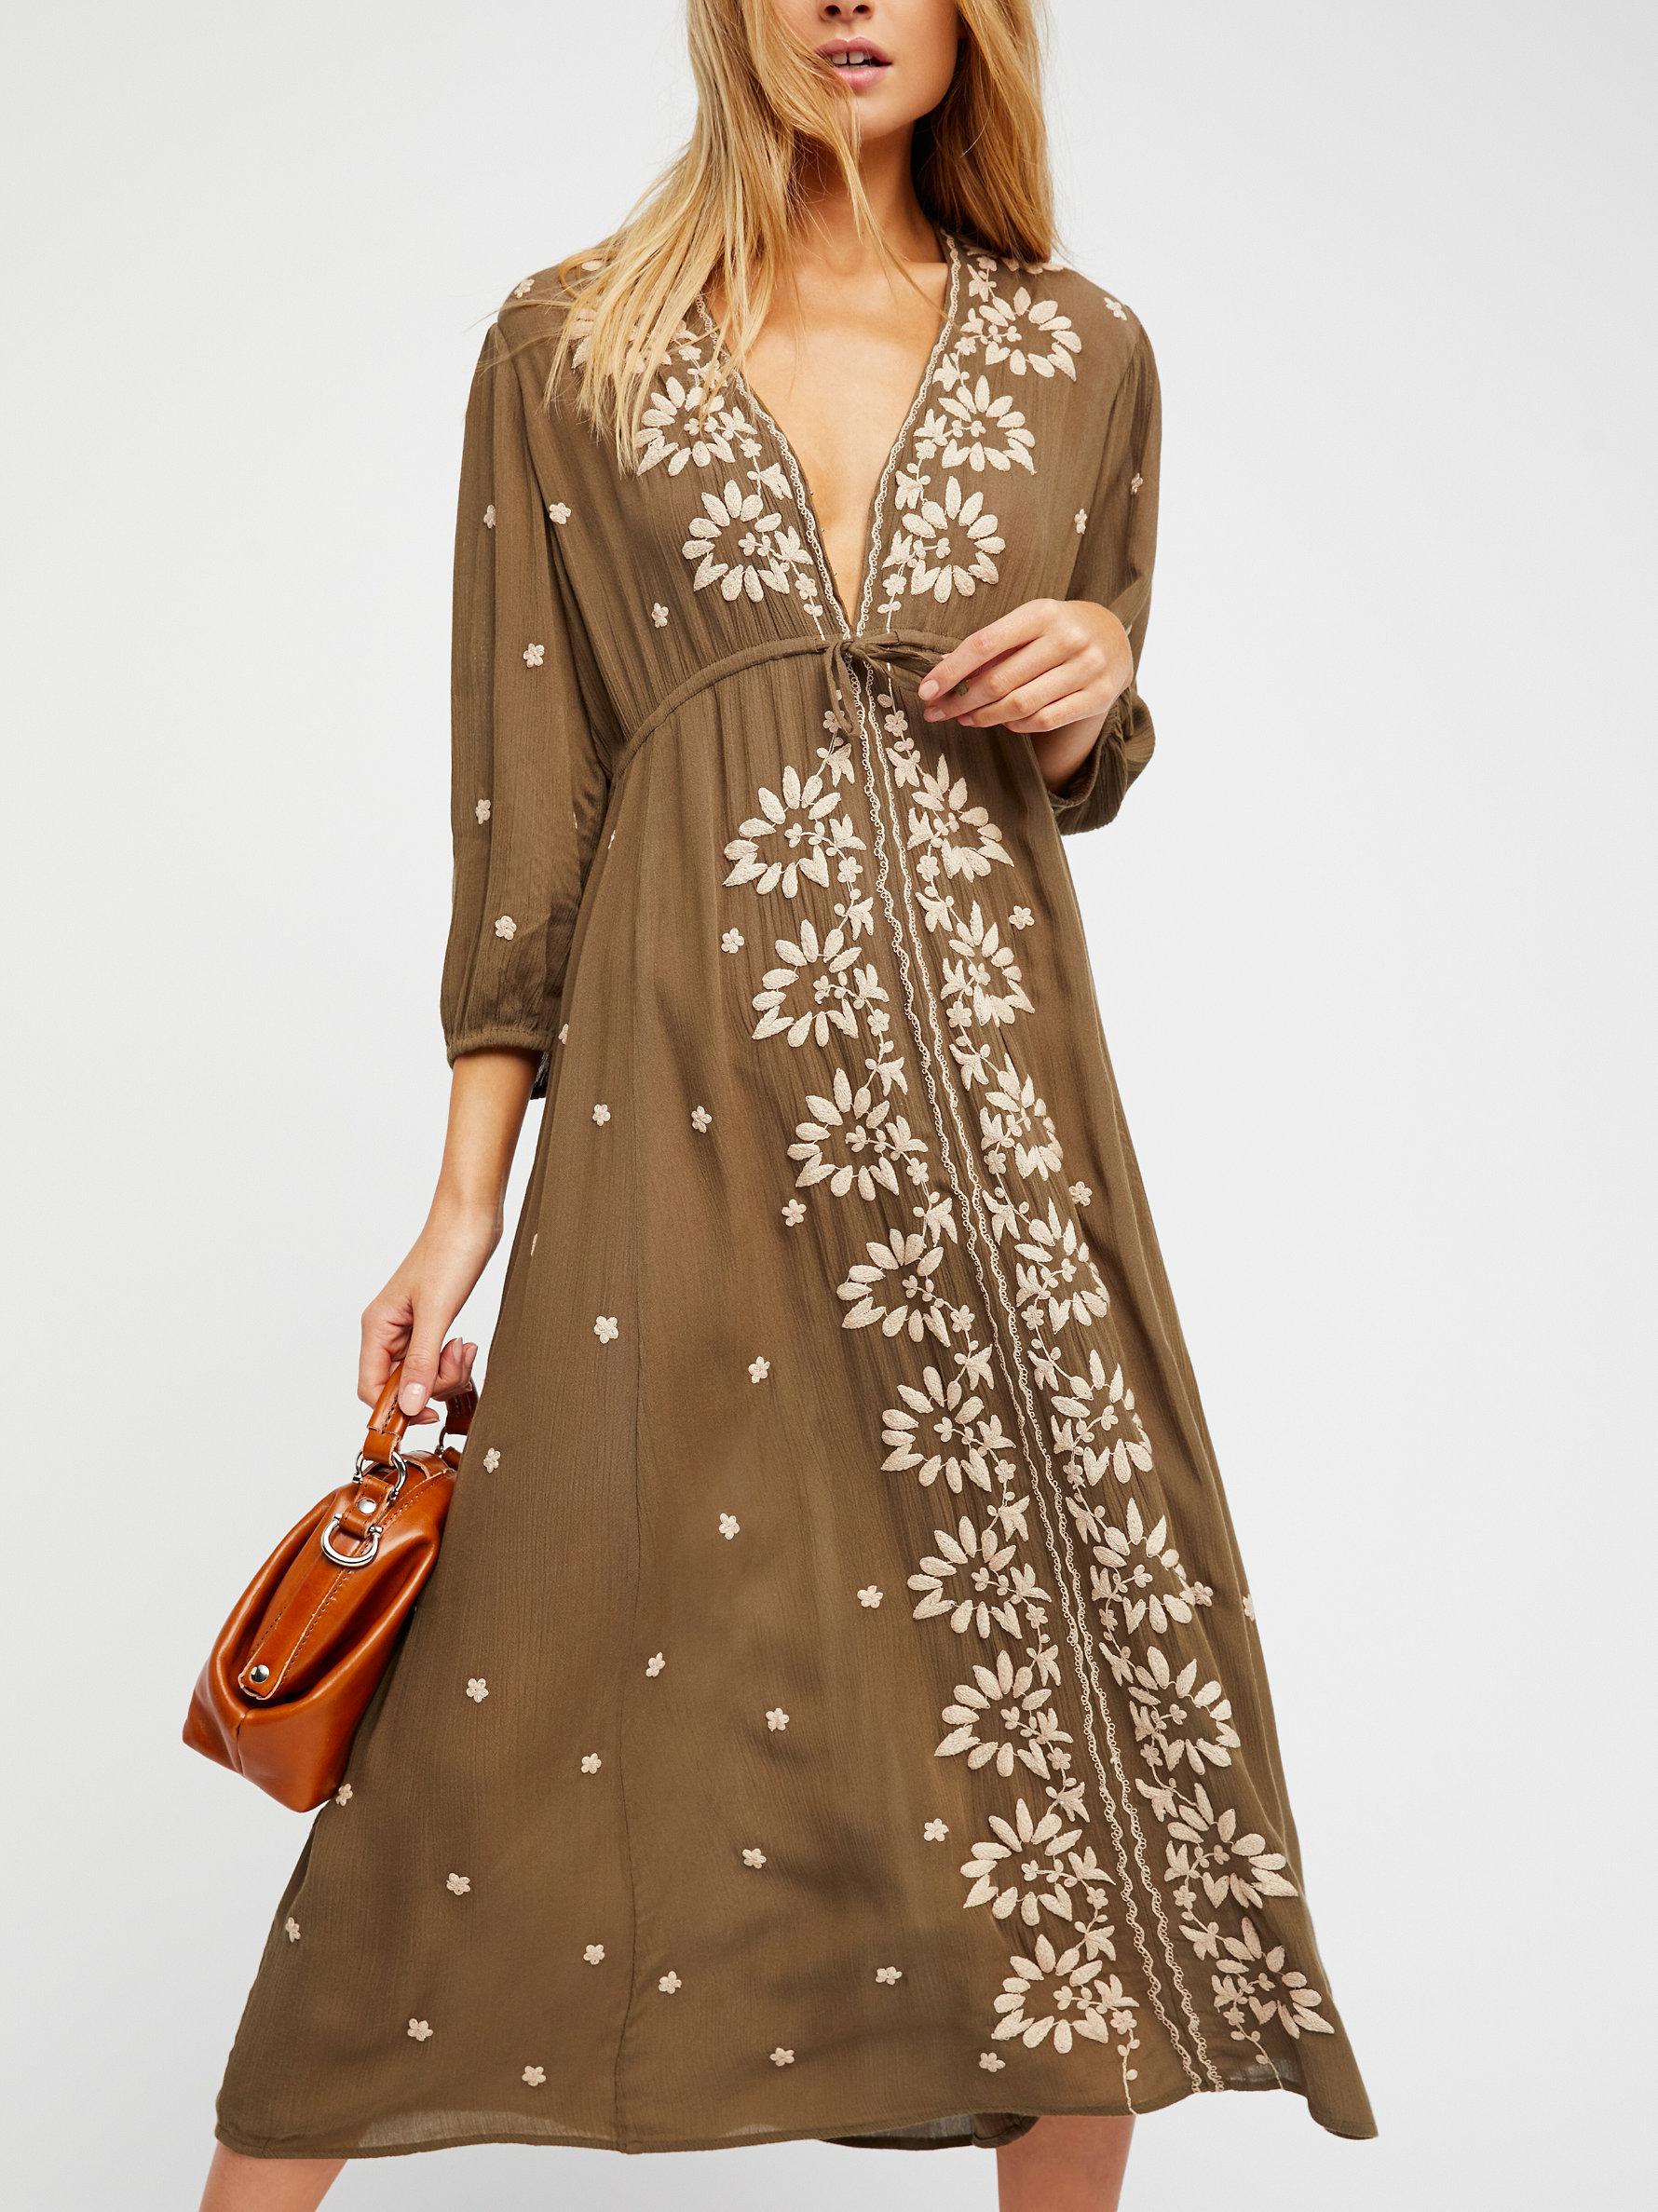 embroidered fable midi dress free people